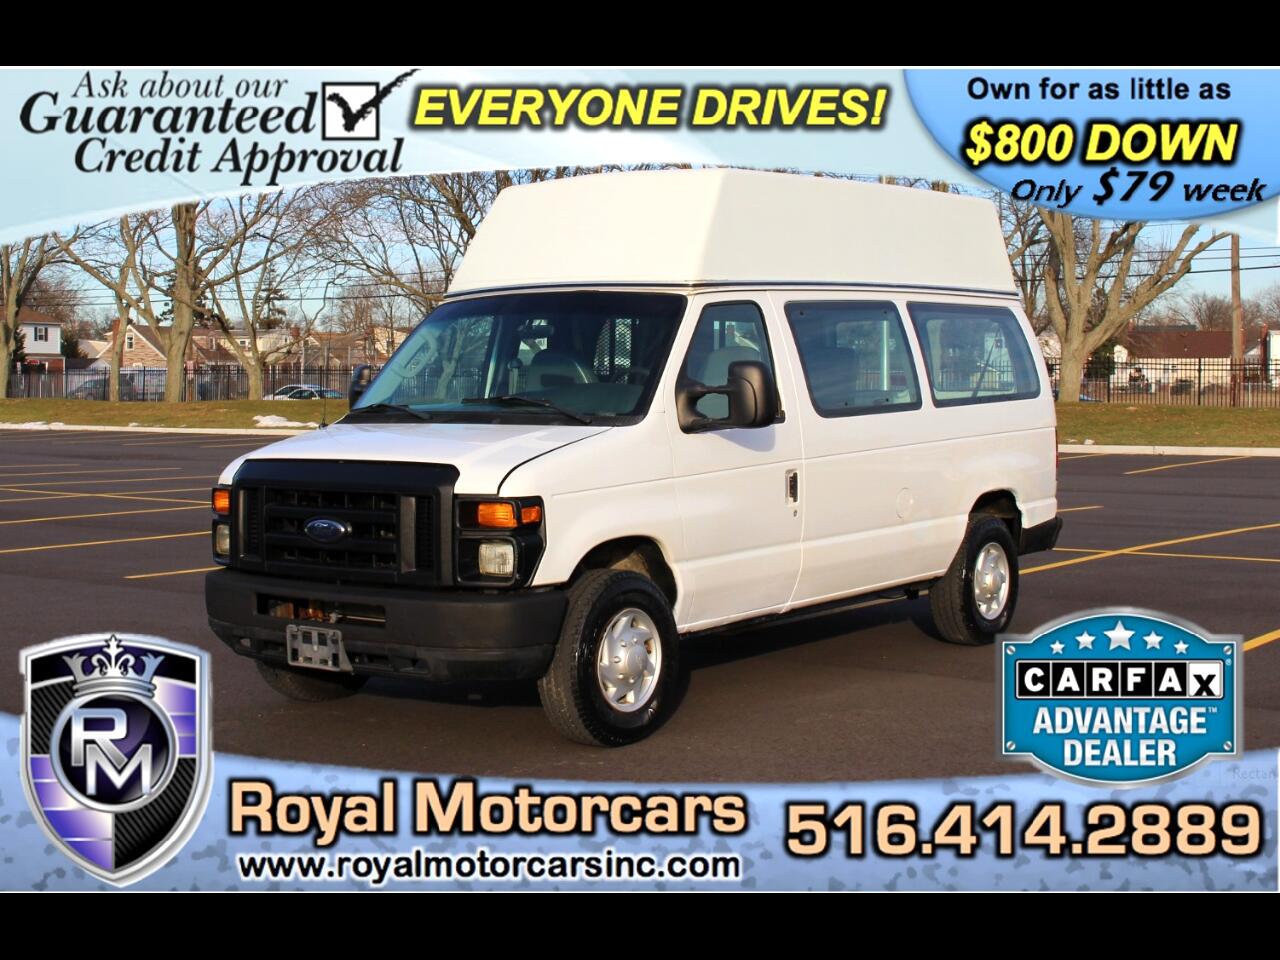 upper past Experiment Used 2008 Ford Econoline Cargo Van E-250 Recreational for Sale in Uniondale  NY 15334.gif Royal Motorcars Inc